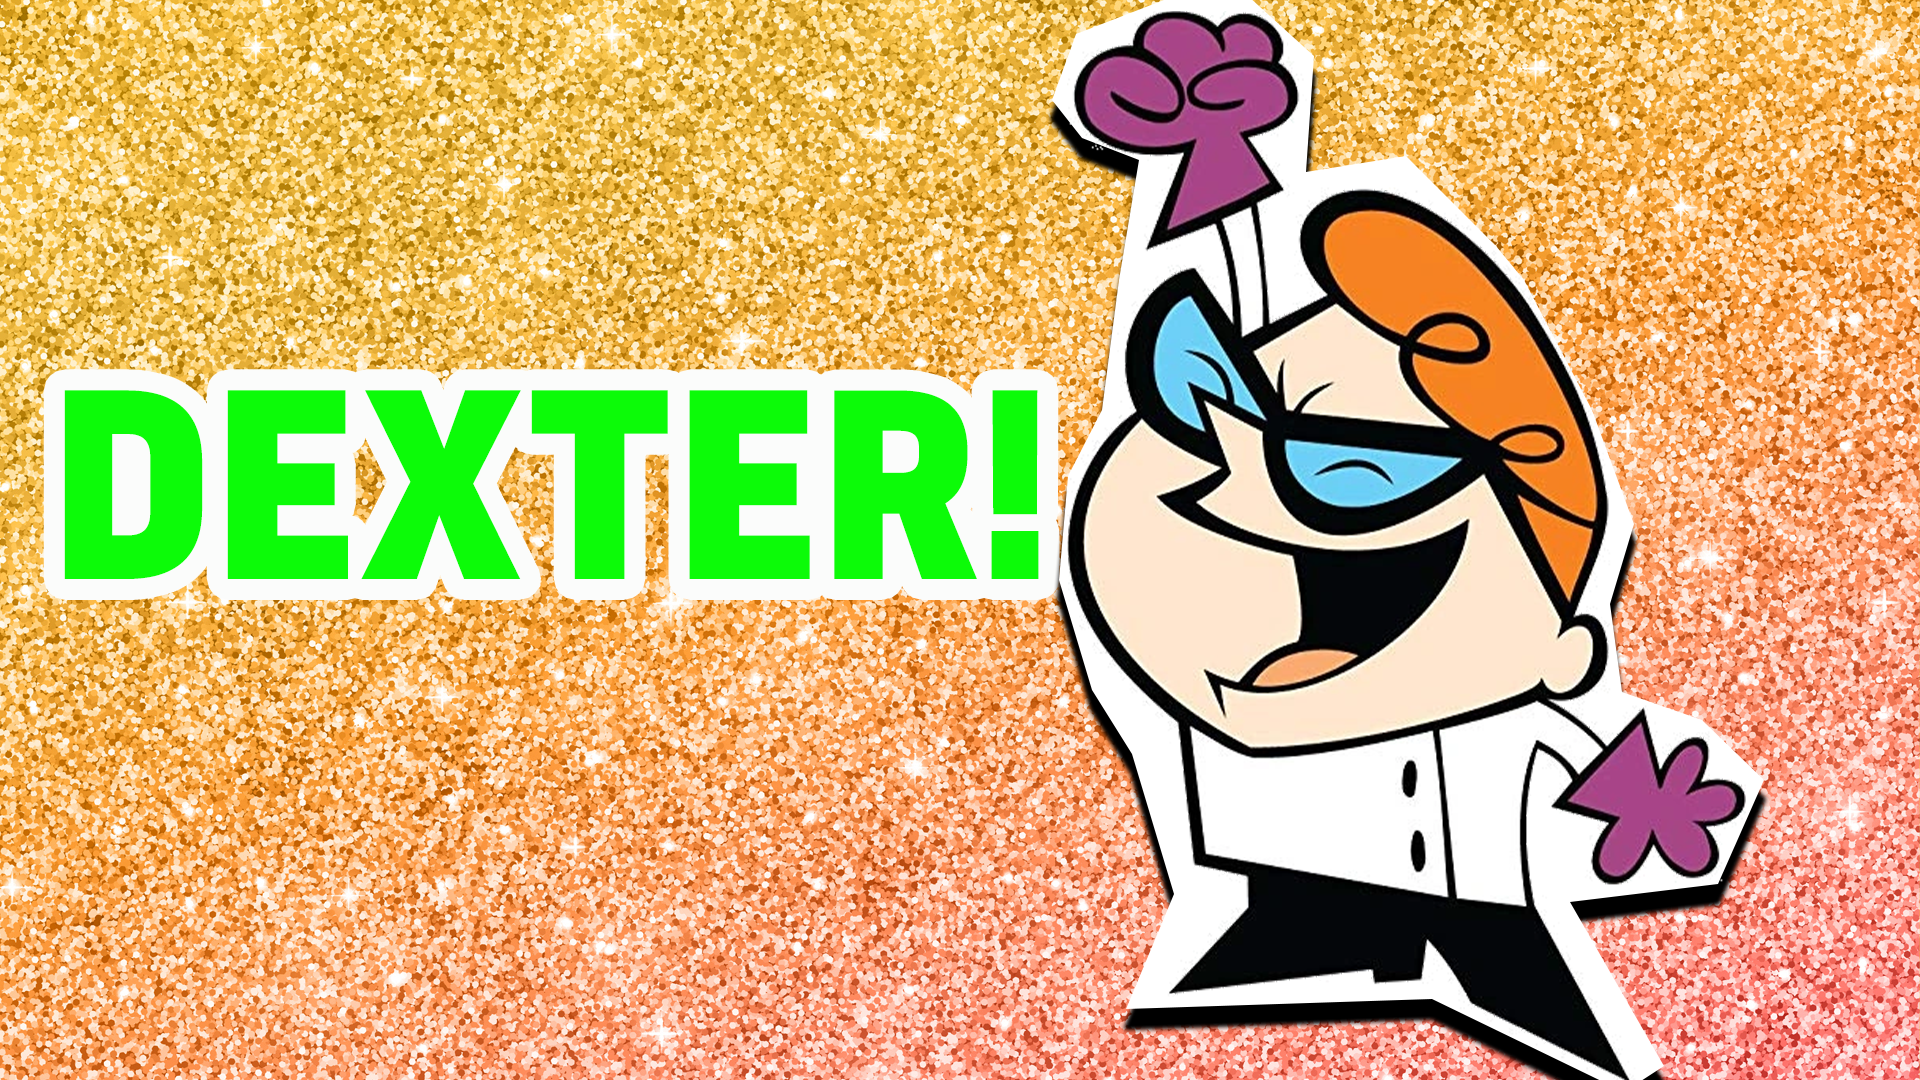 You're Dexter! You're a bit of an evil genius and you're always experimenting! You'd rather be in your lab than hang out with your friends!